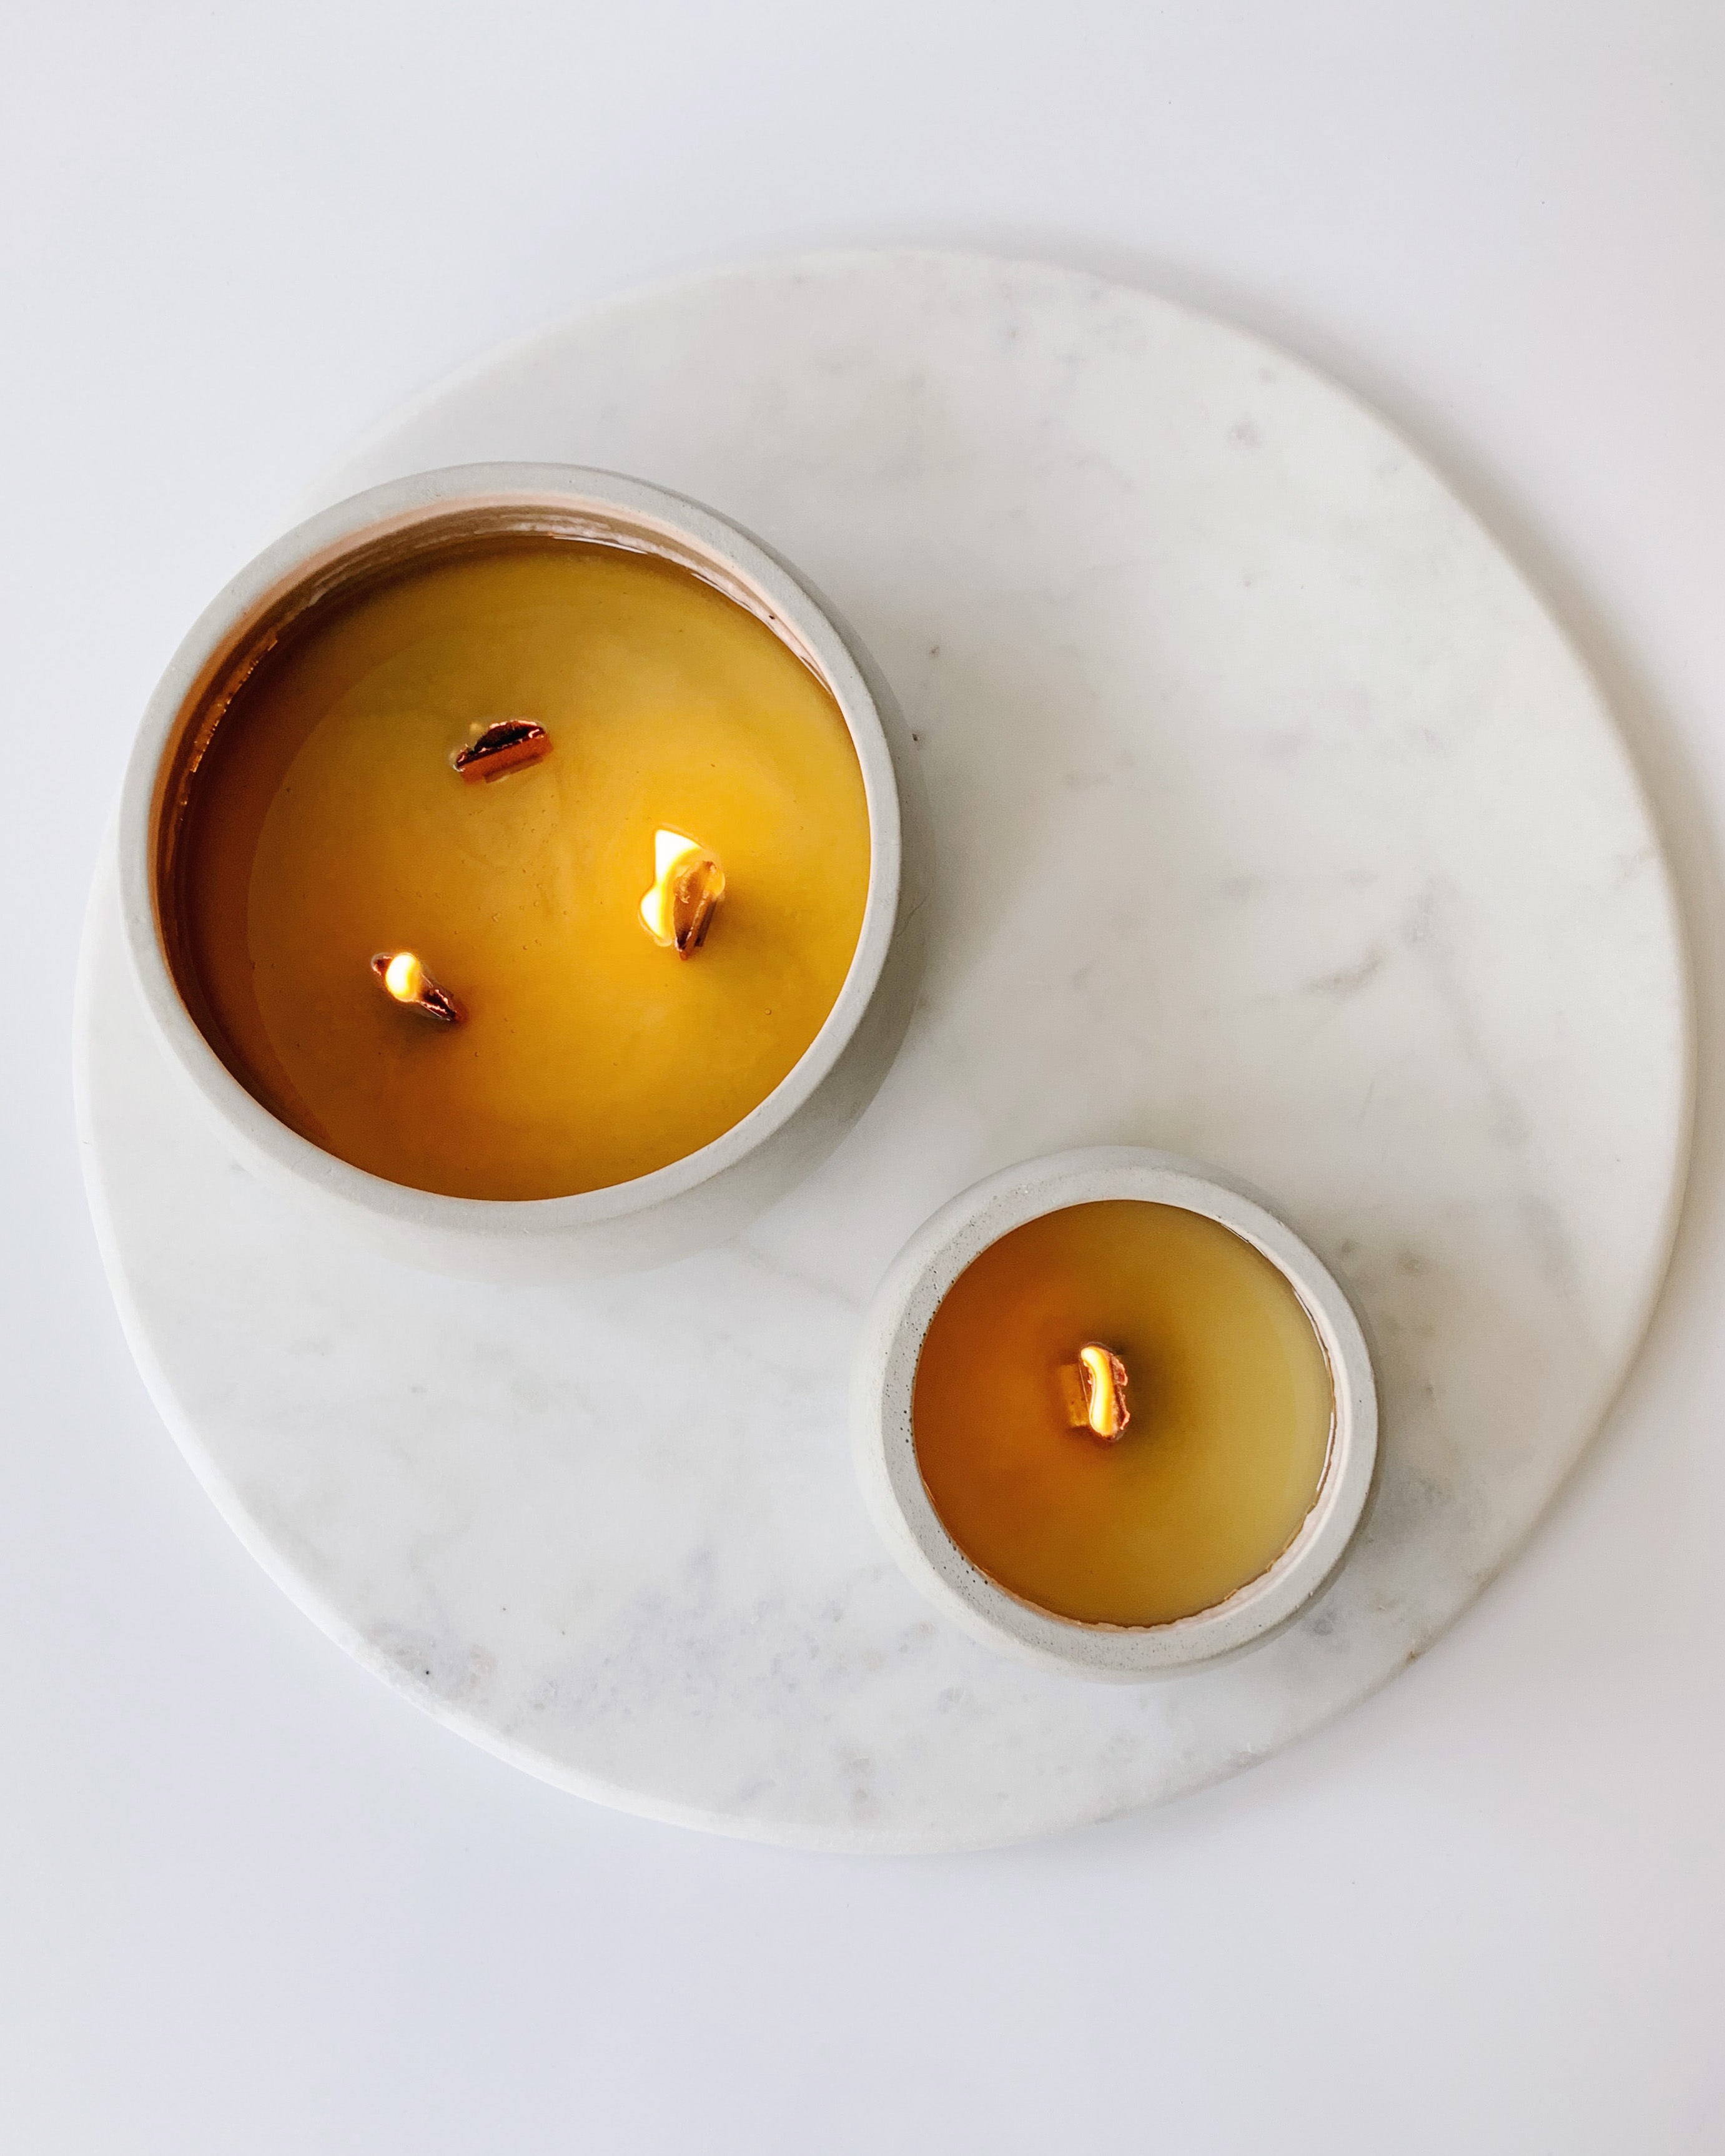 Fall Breeze Coconut Soy Candle - Concrete Wooden Wick Vessel